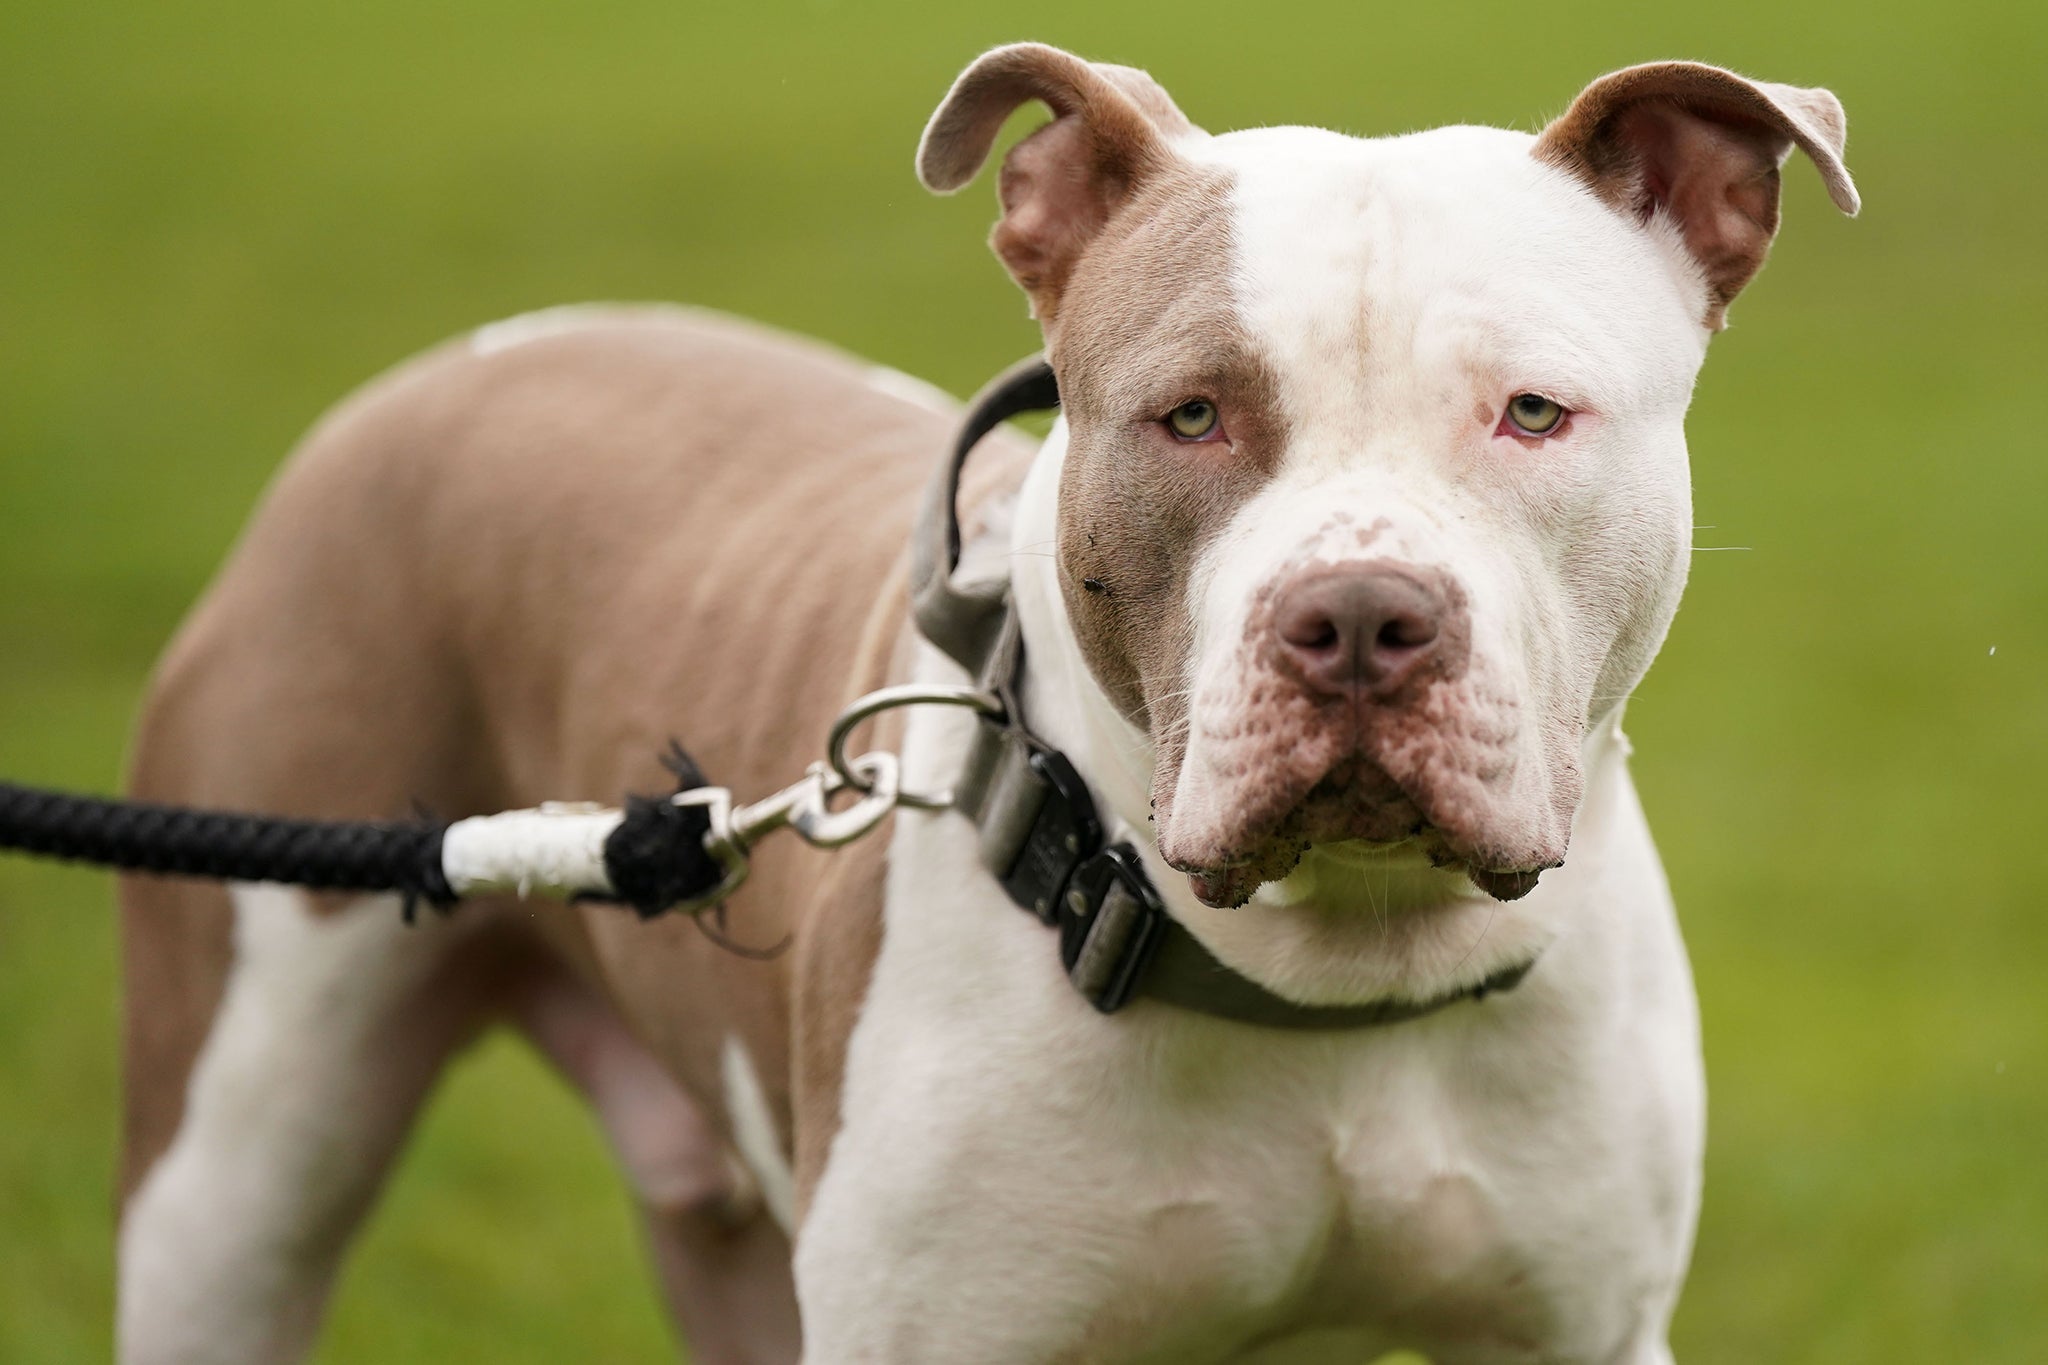 A report involving an XL bully dog featured a ‘lovely malapropism’